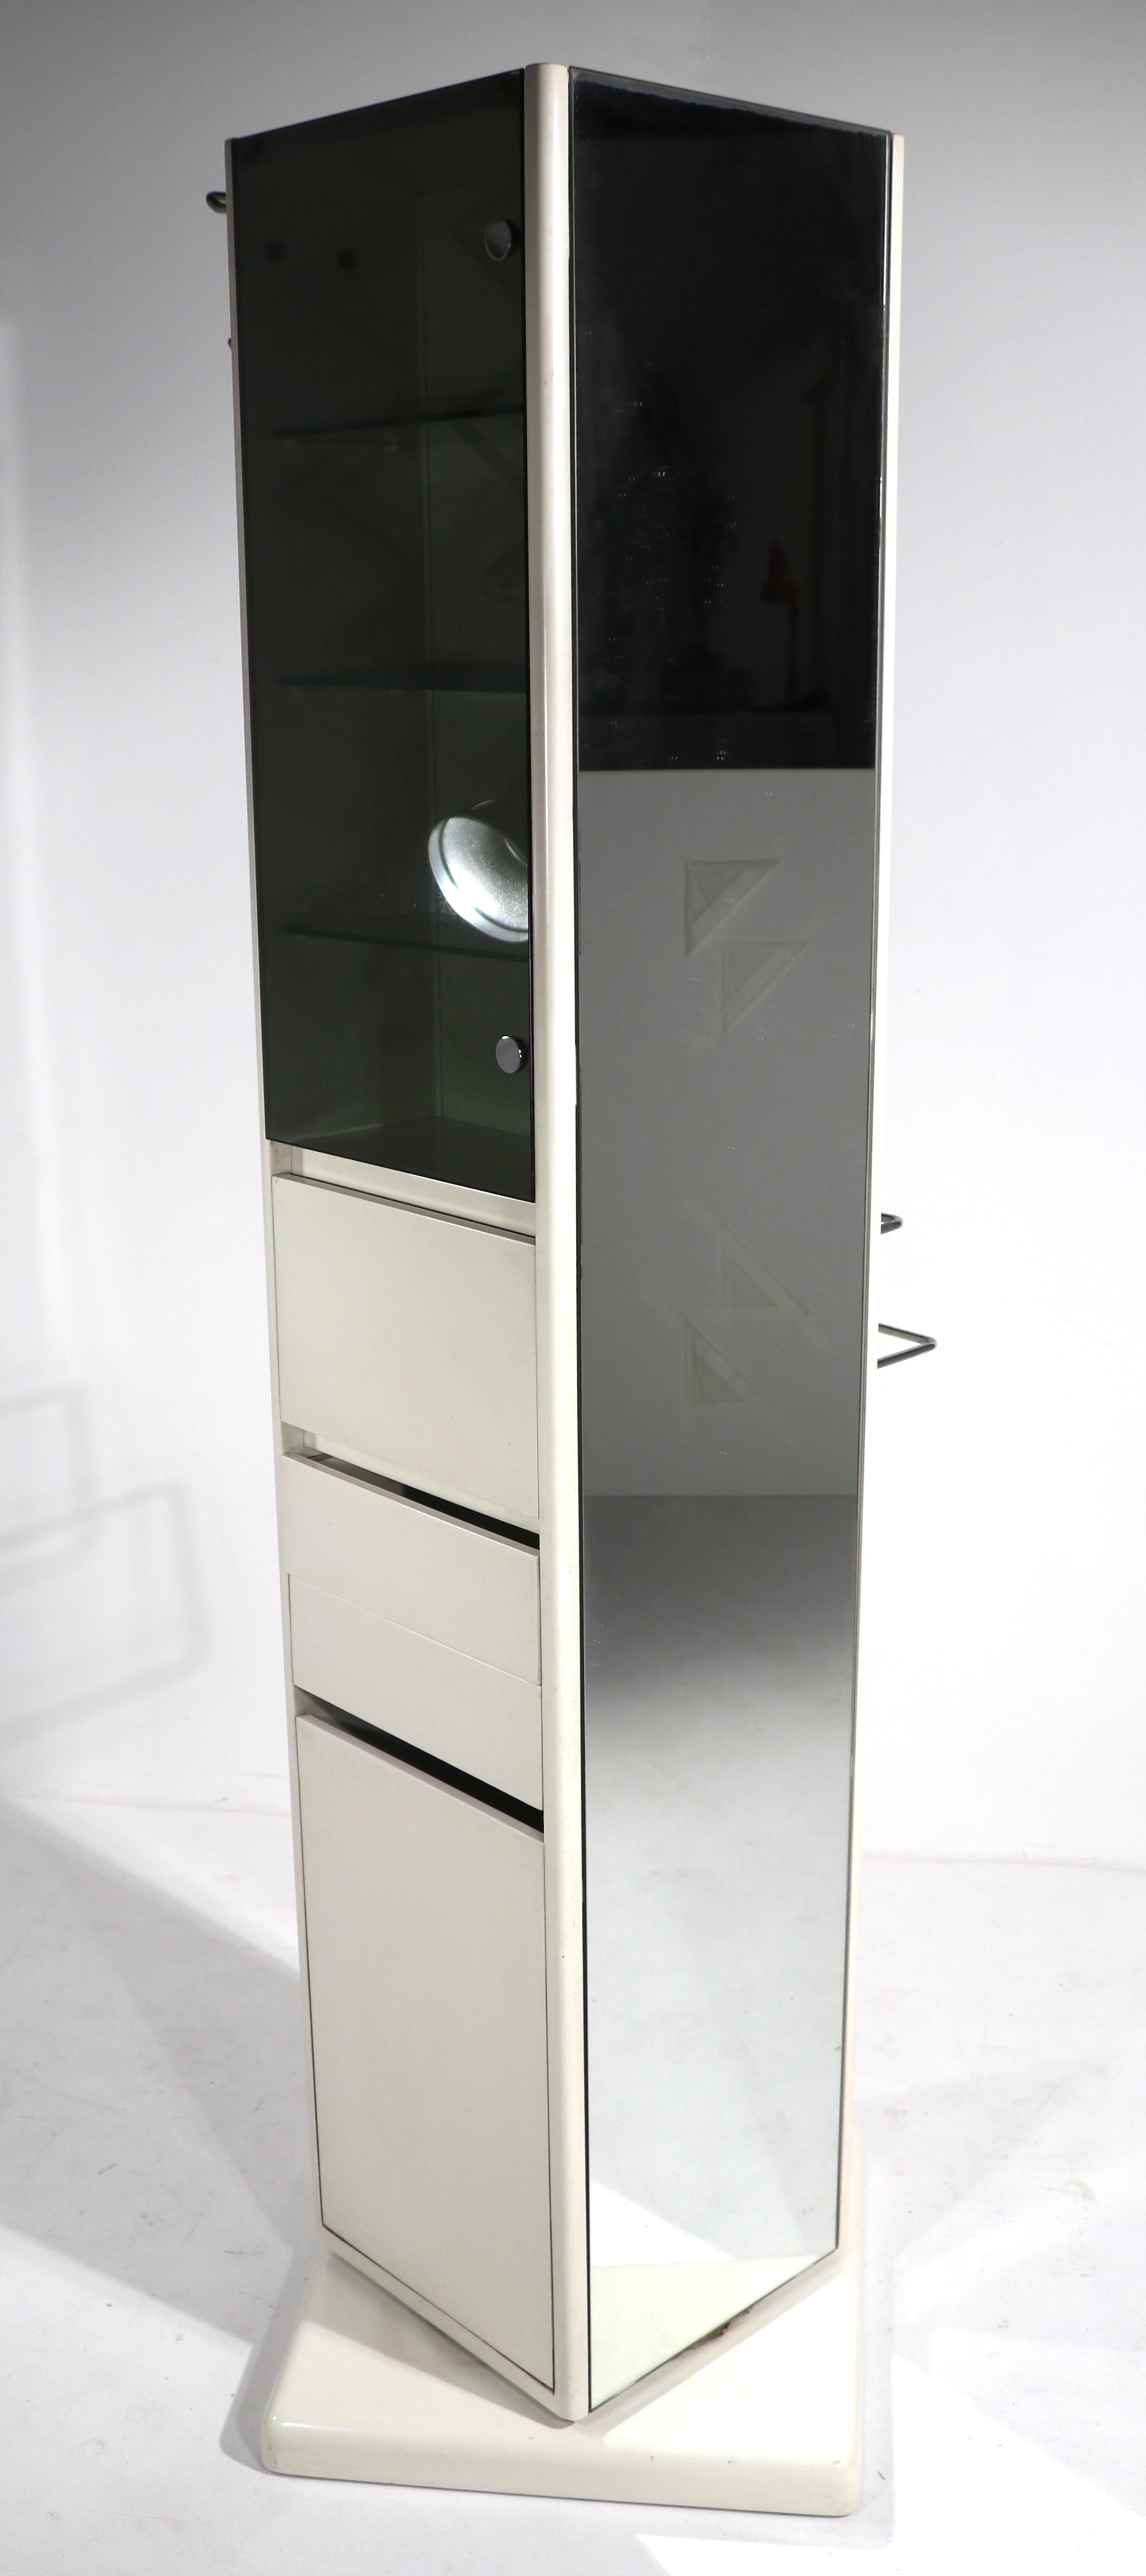 Unusual Revolving Kitchen Storage Cabinet after Colombo 9